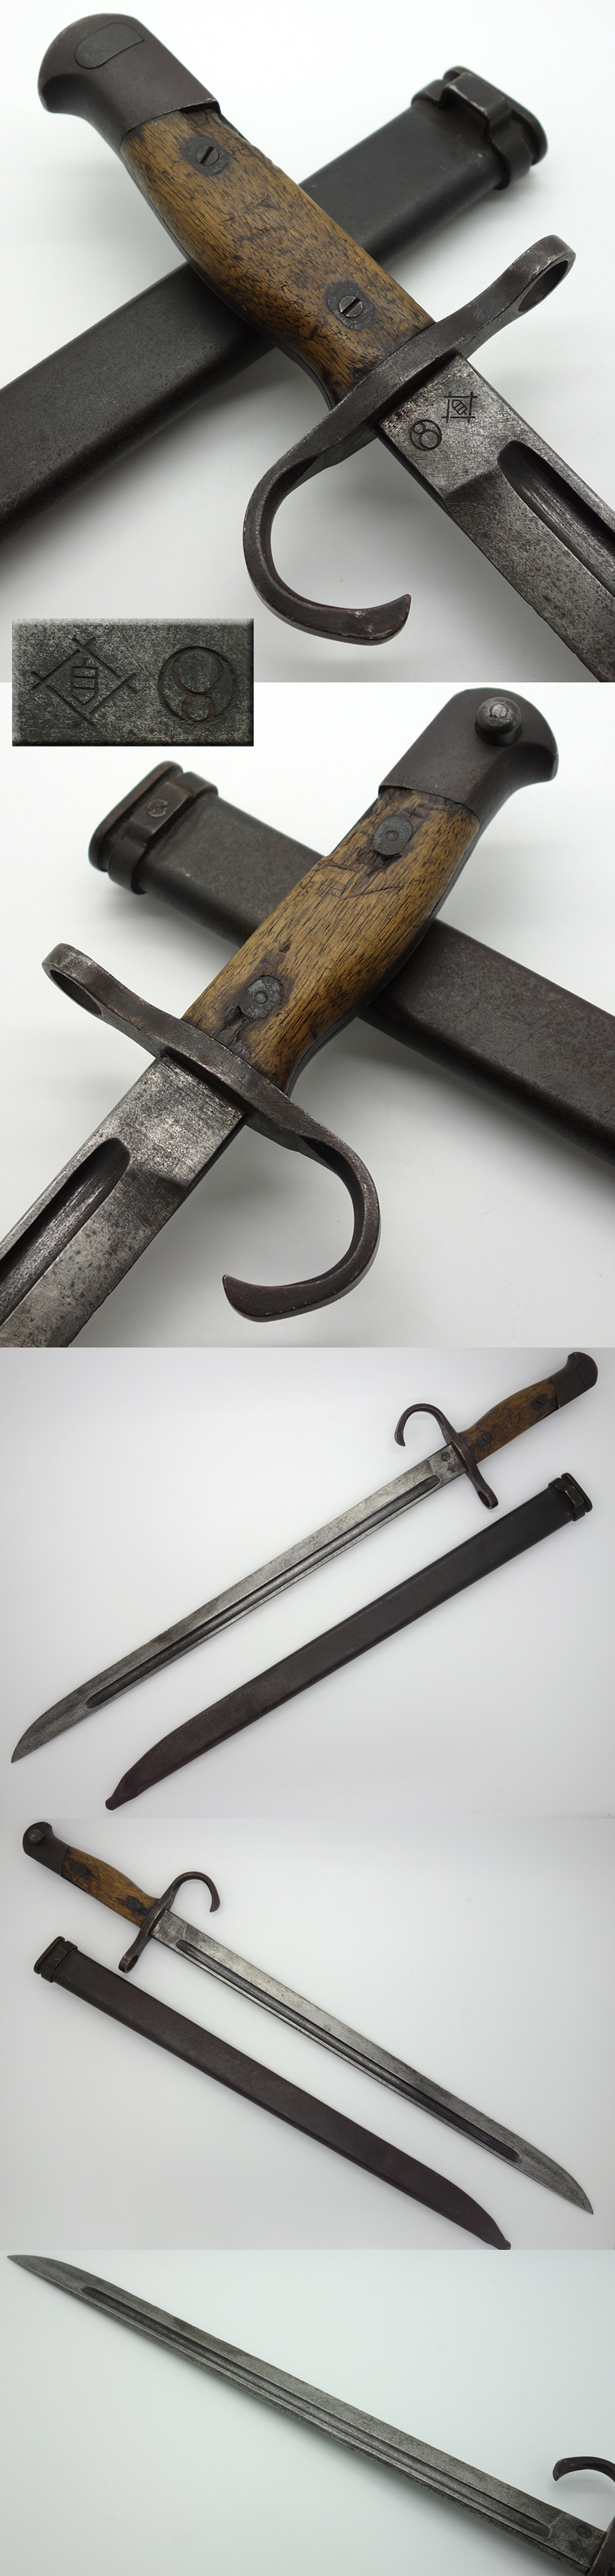 Early Japanese Type 30 Bayonet by the TALW